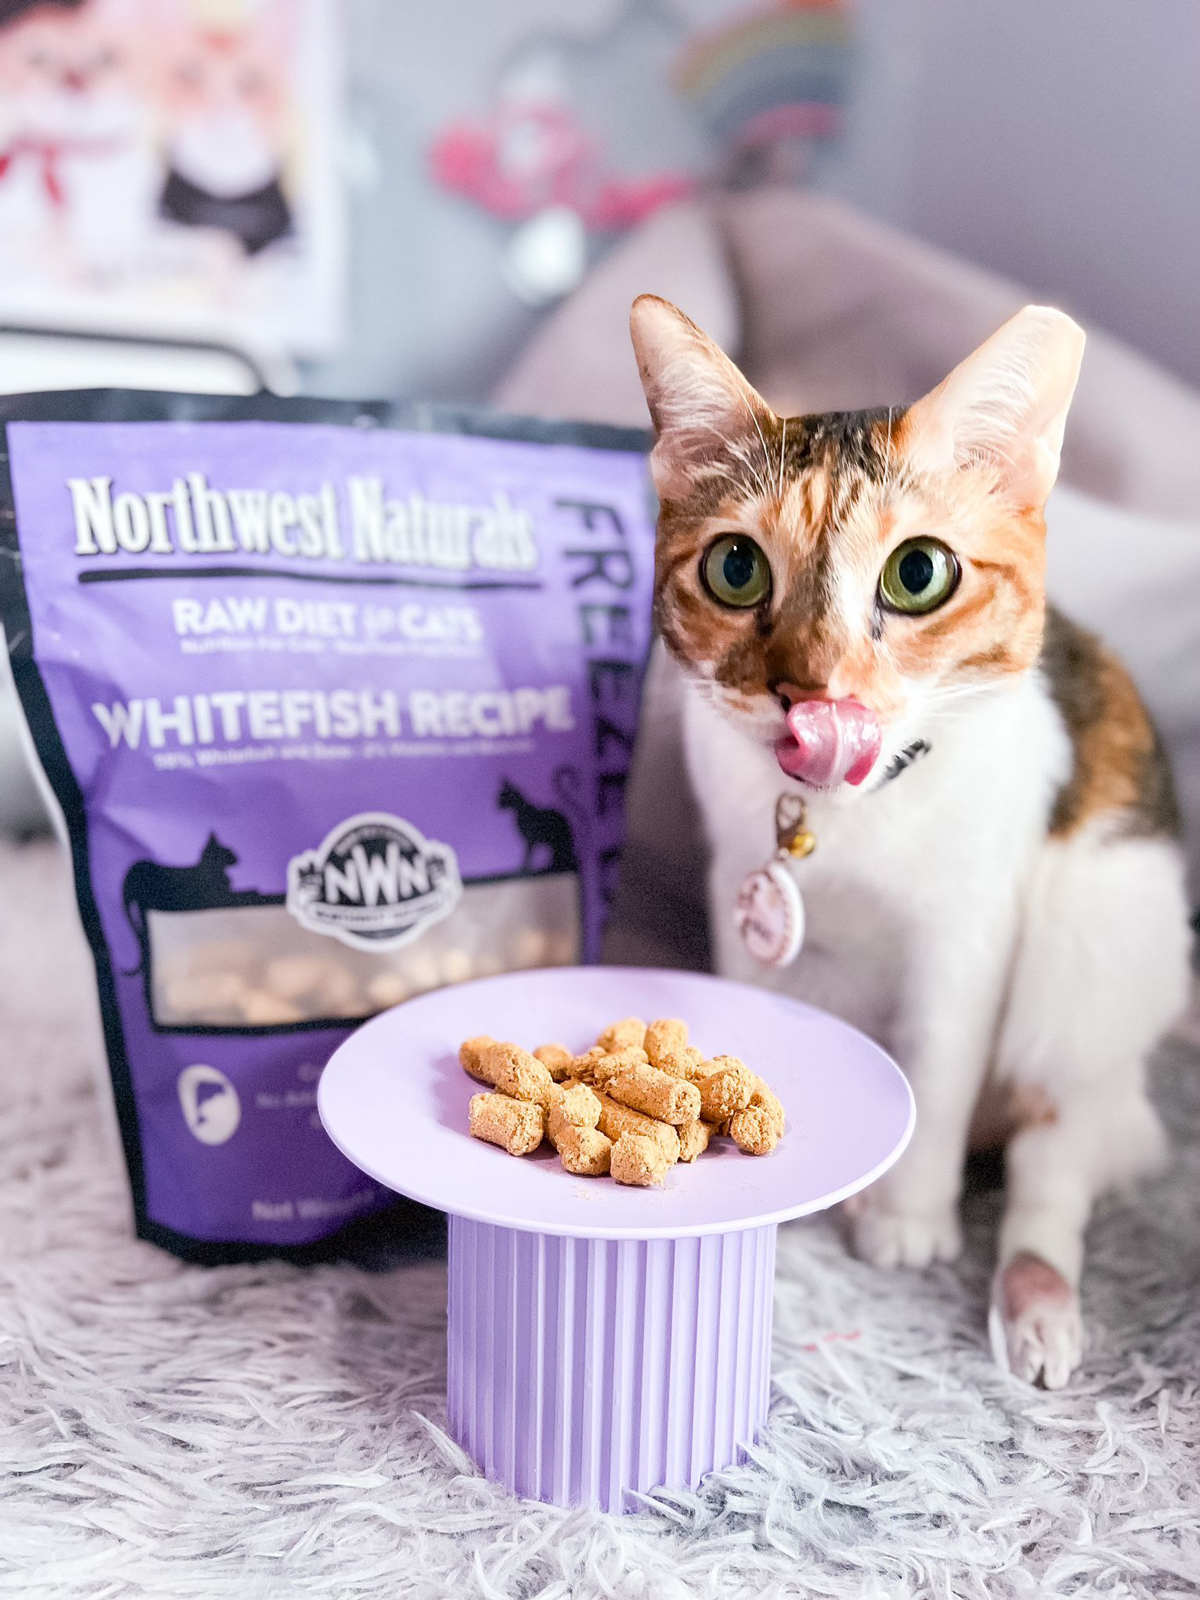 Gojiberry’s Love Affair with Northwest Natural Pet Food